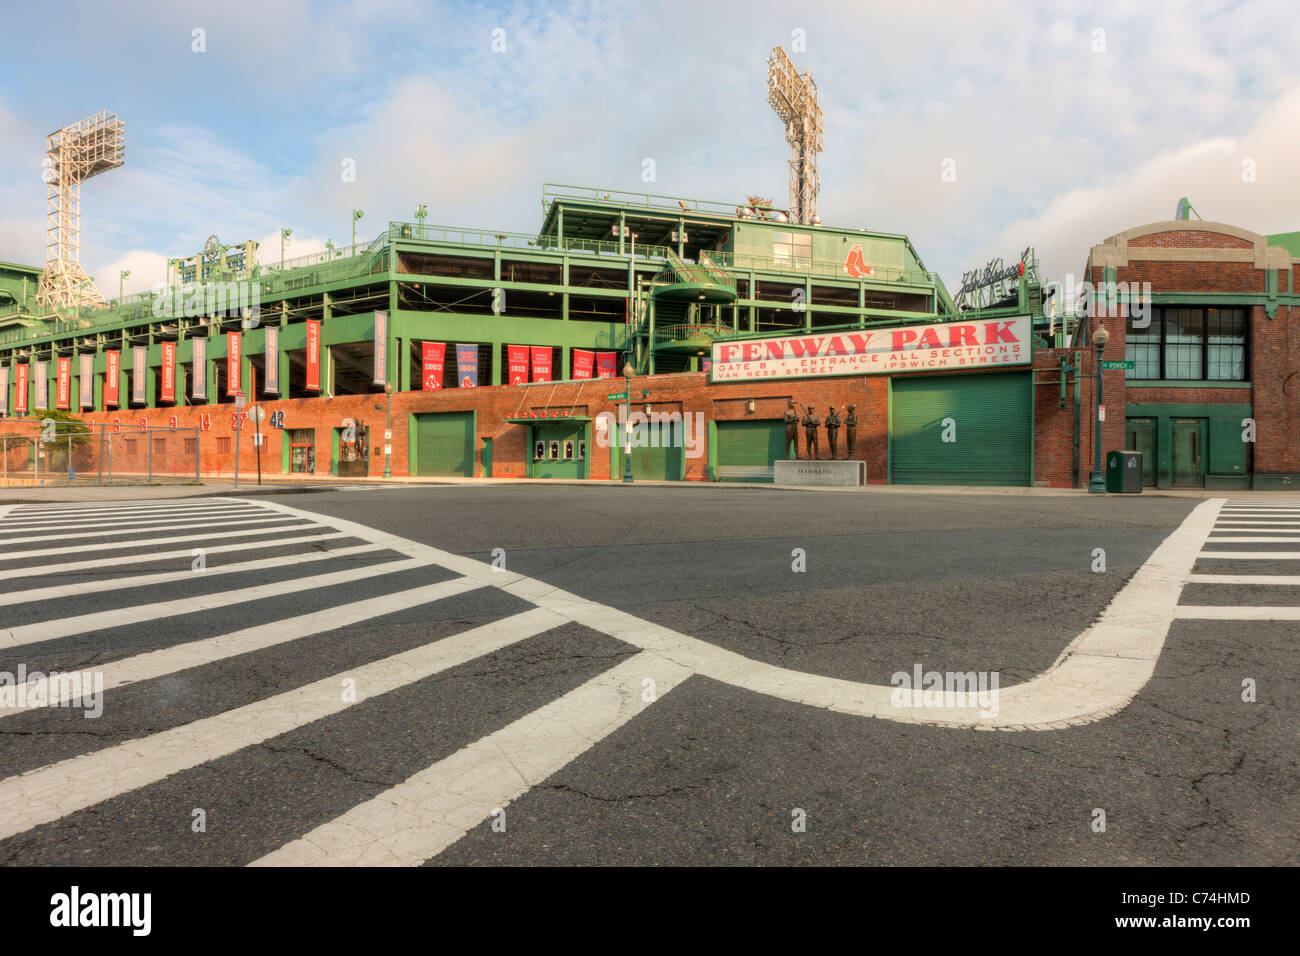 A view of historic Fenway Park in Boston, Massachusetts from just outside Gate B. Stock Photo